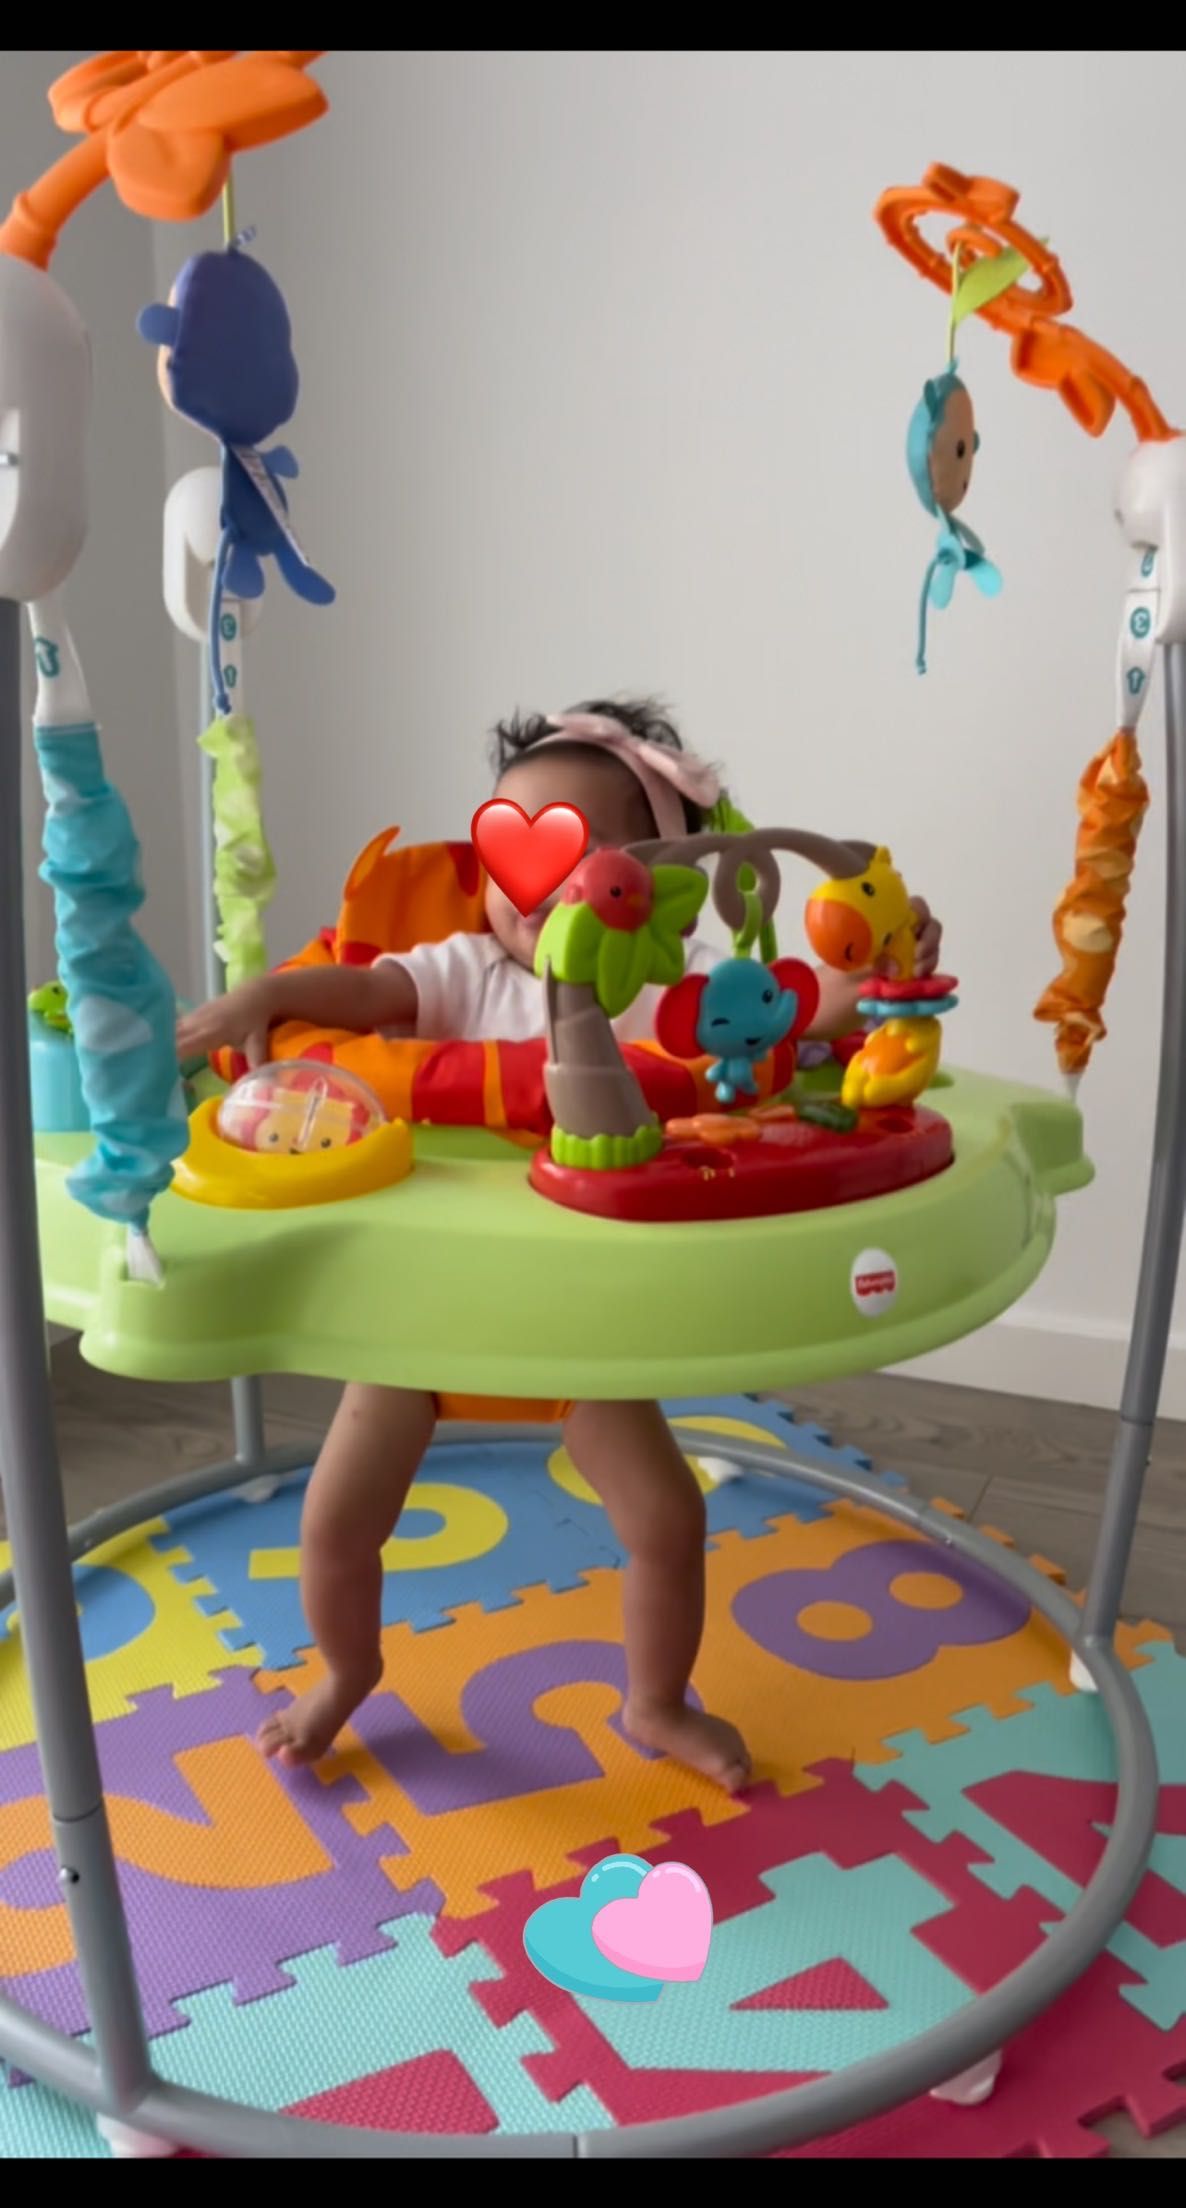 Fisher-Price - Jumperoo Jungle